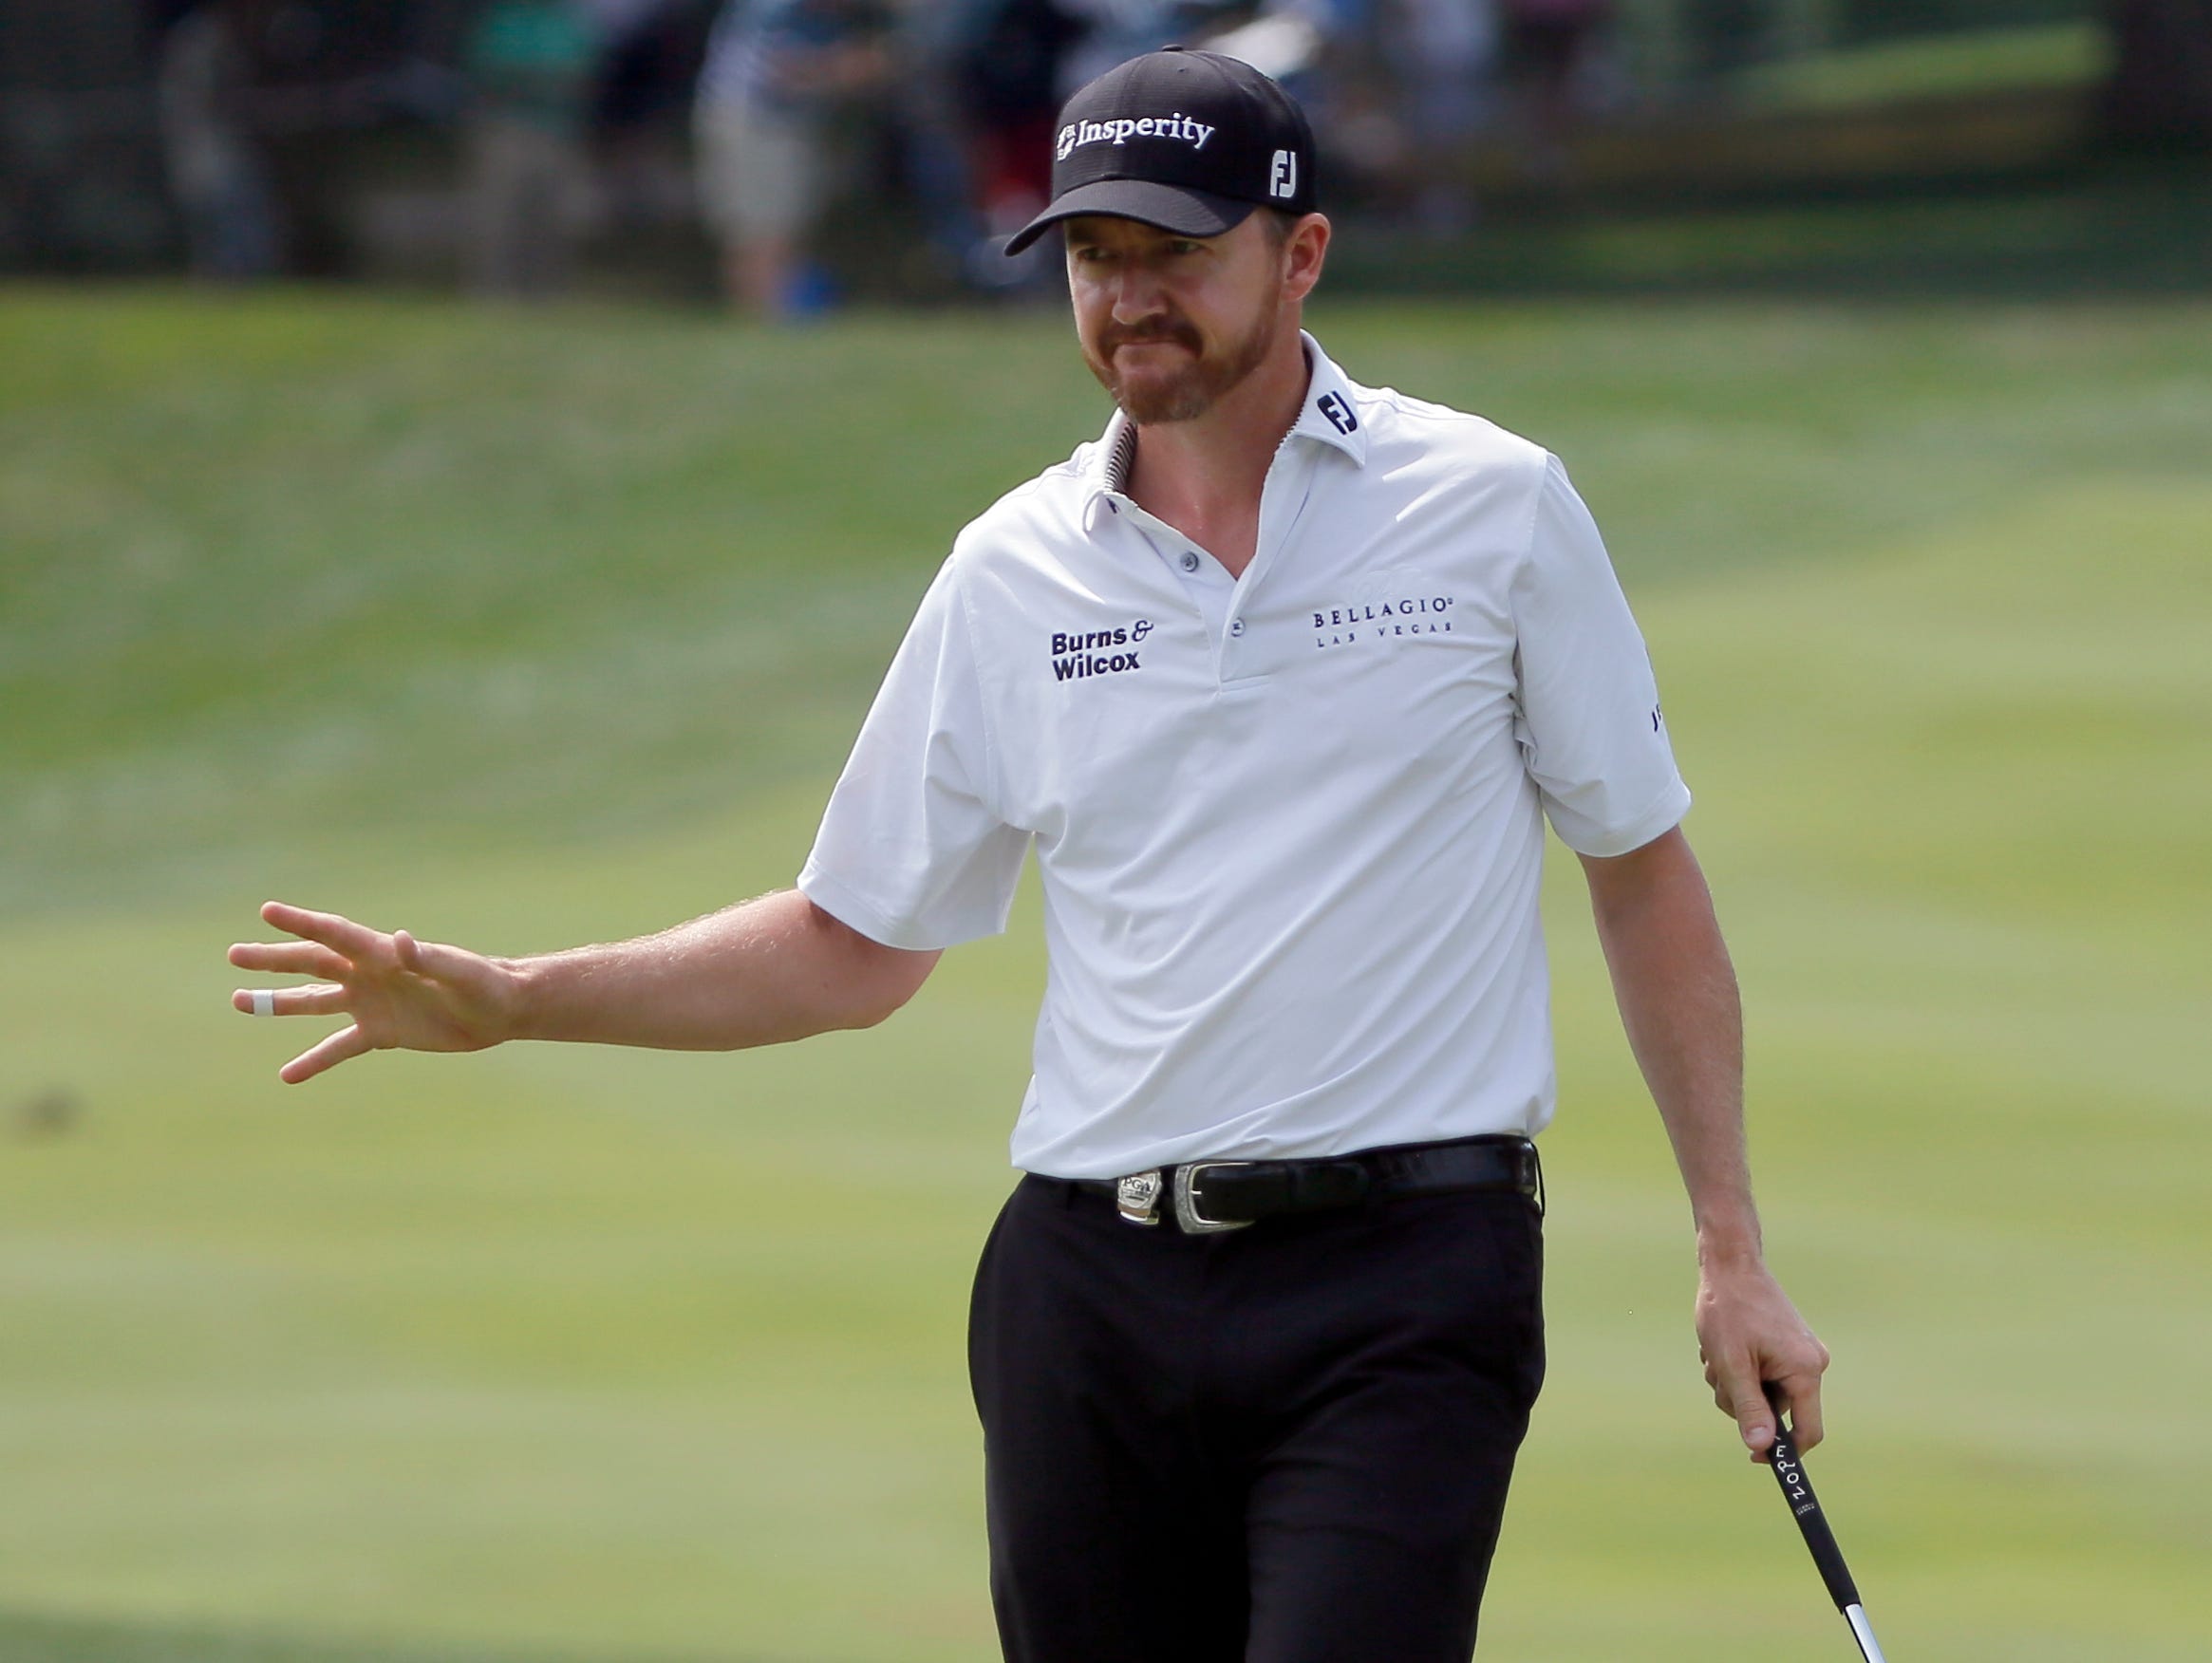 Jimmy Walker reacts to his putt on the third hole during the first round of the PGA Championship golf tournament at Baltusrol Golf Club in Springfield, N.J., Thursday, July 28, 2016. (AP Photo/Tony Gutierrez)